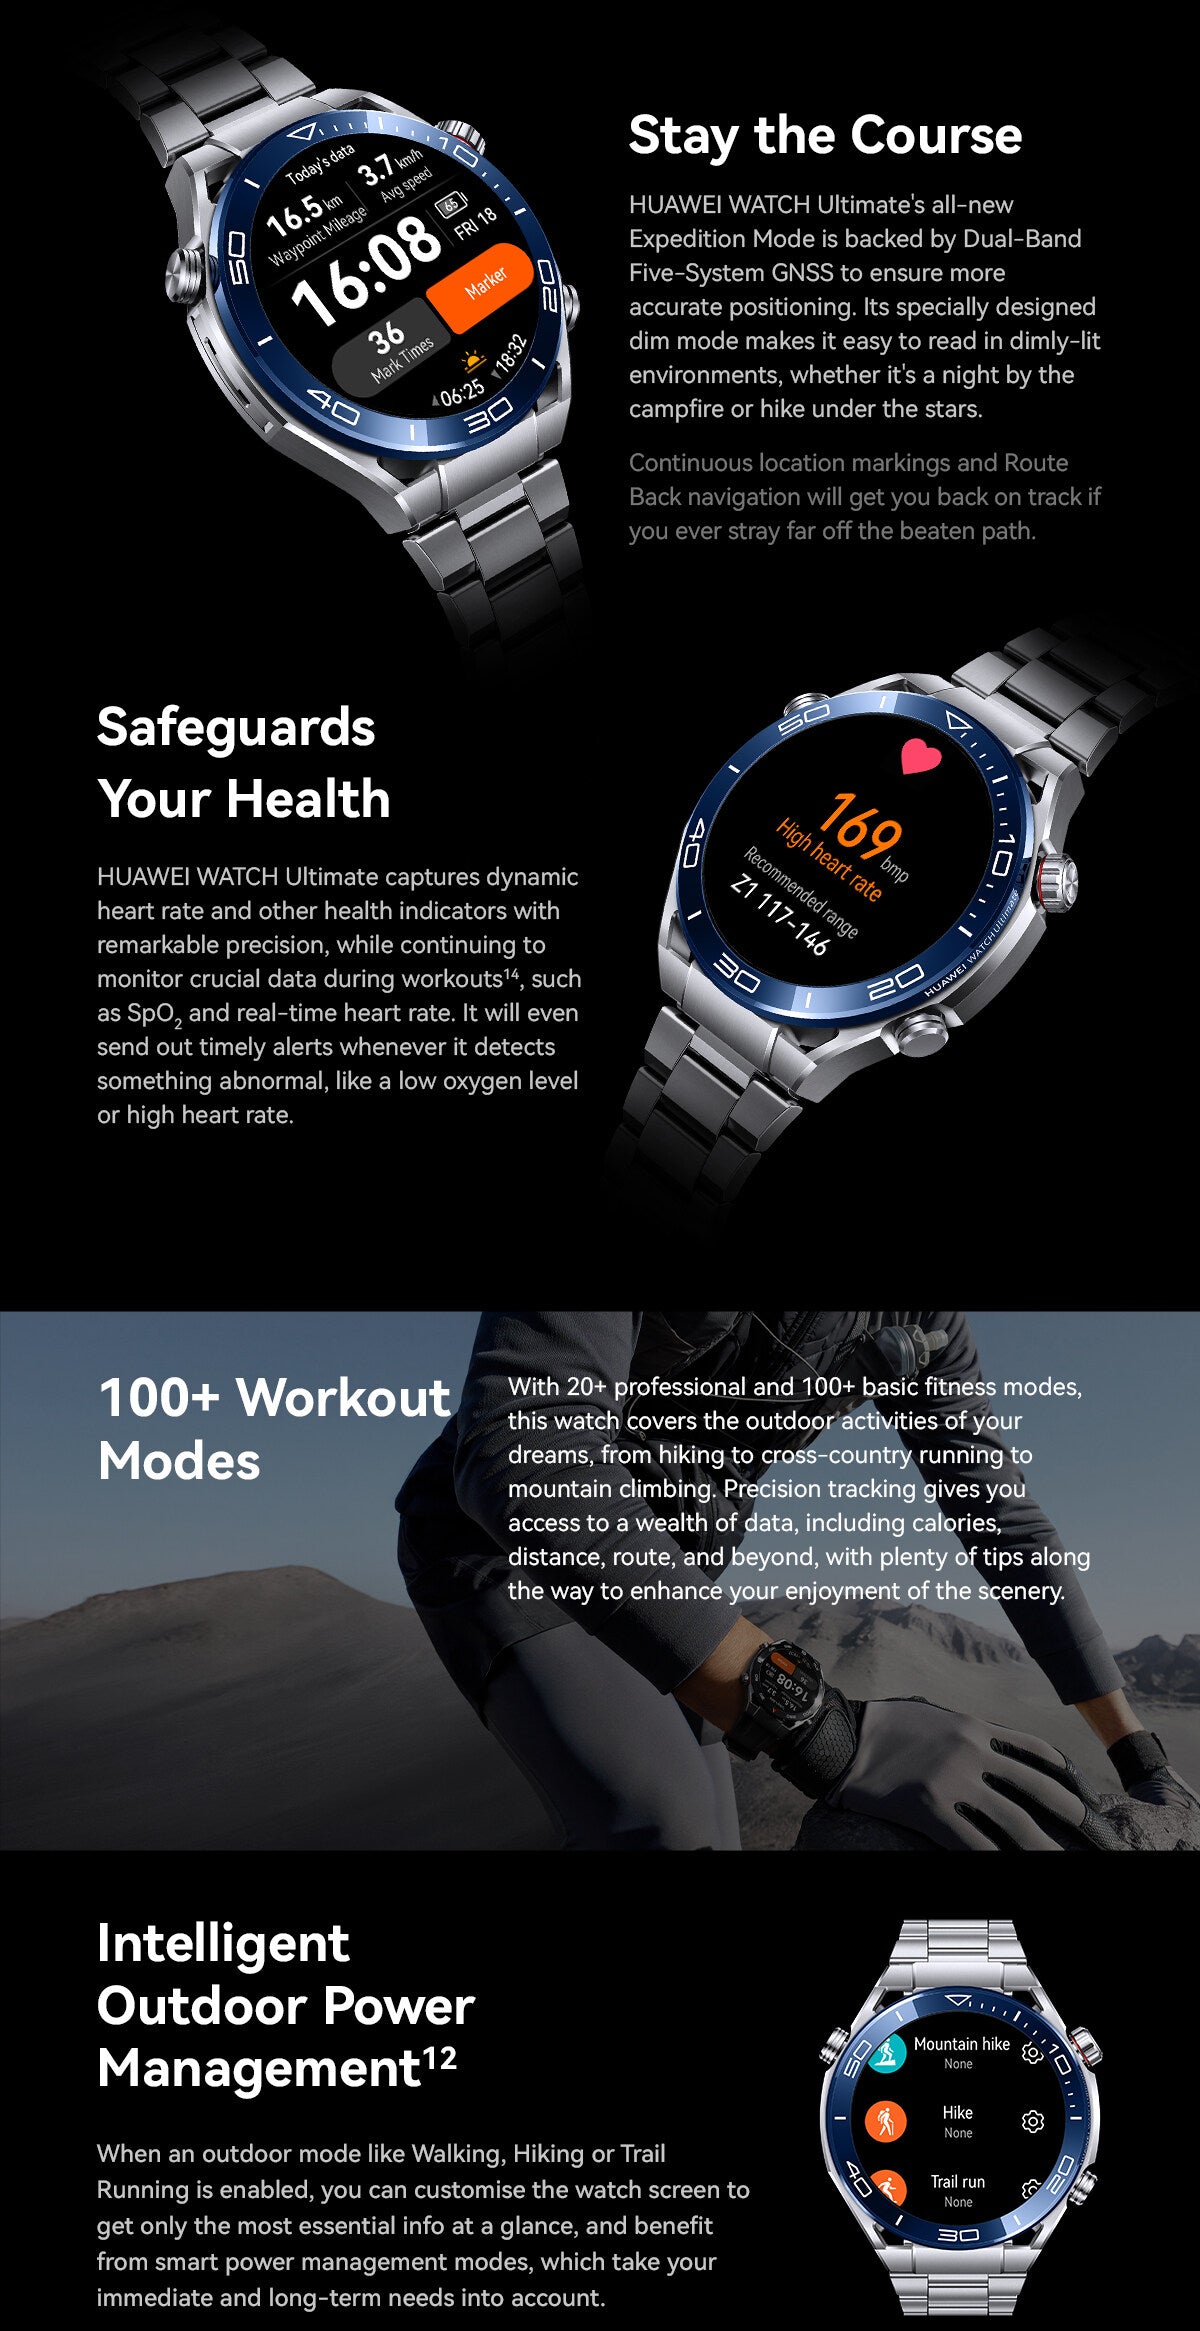 Huawei Watch Ultimate Sport Modes